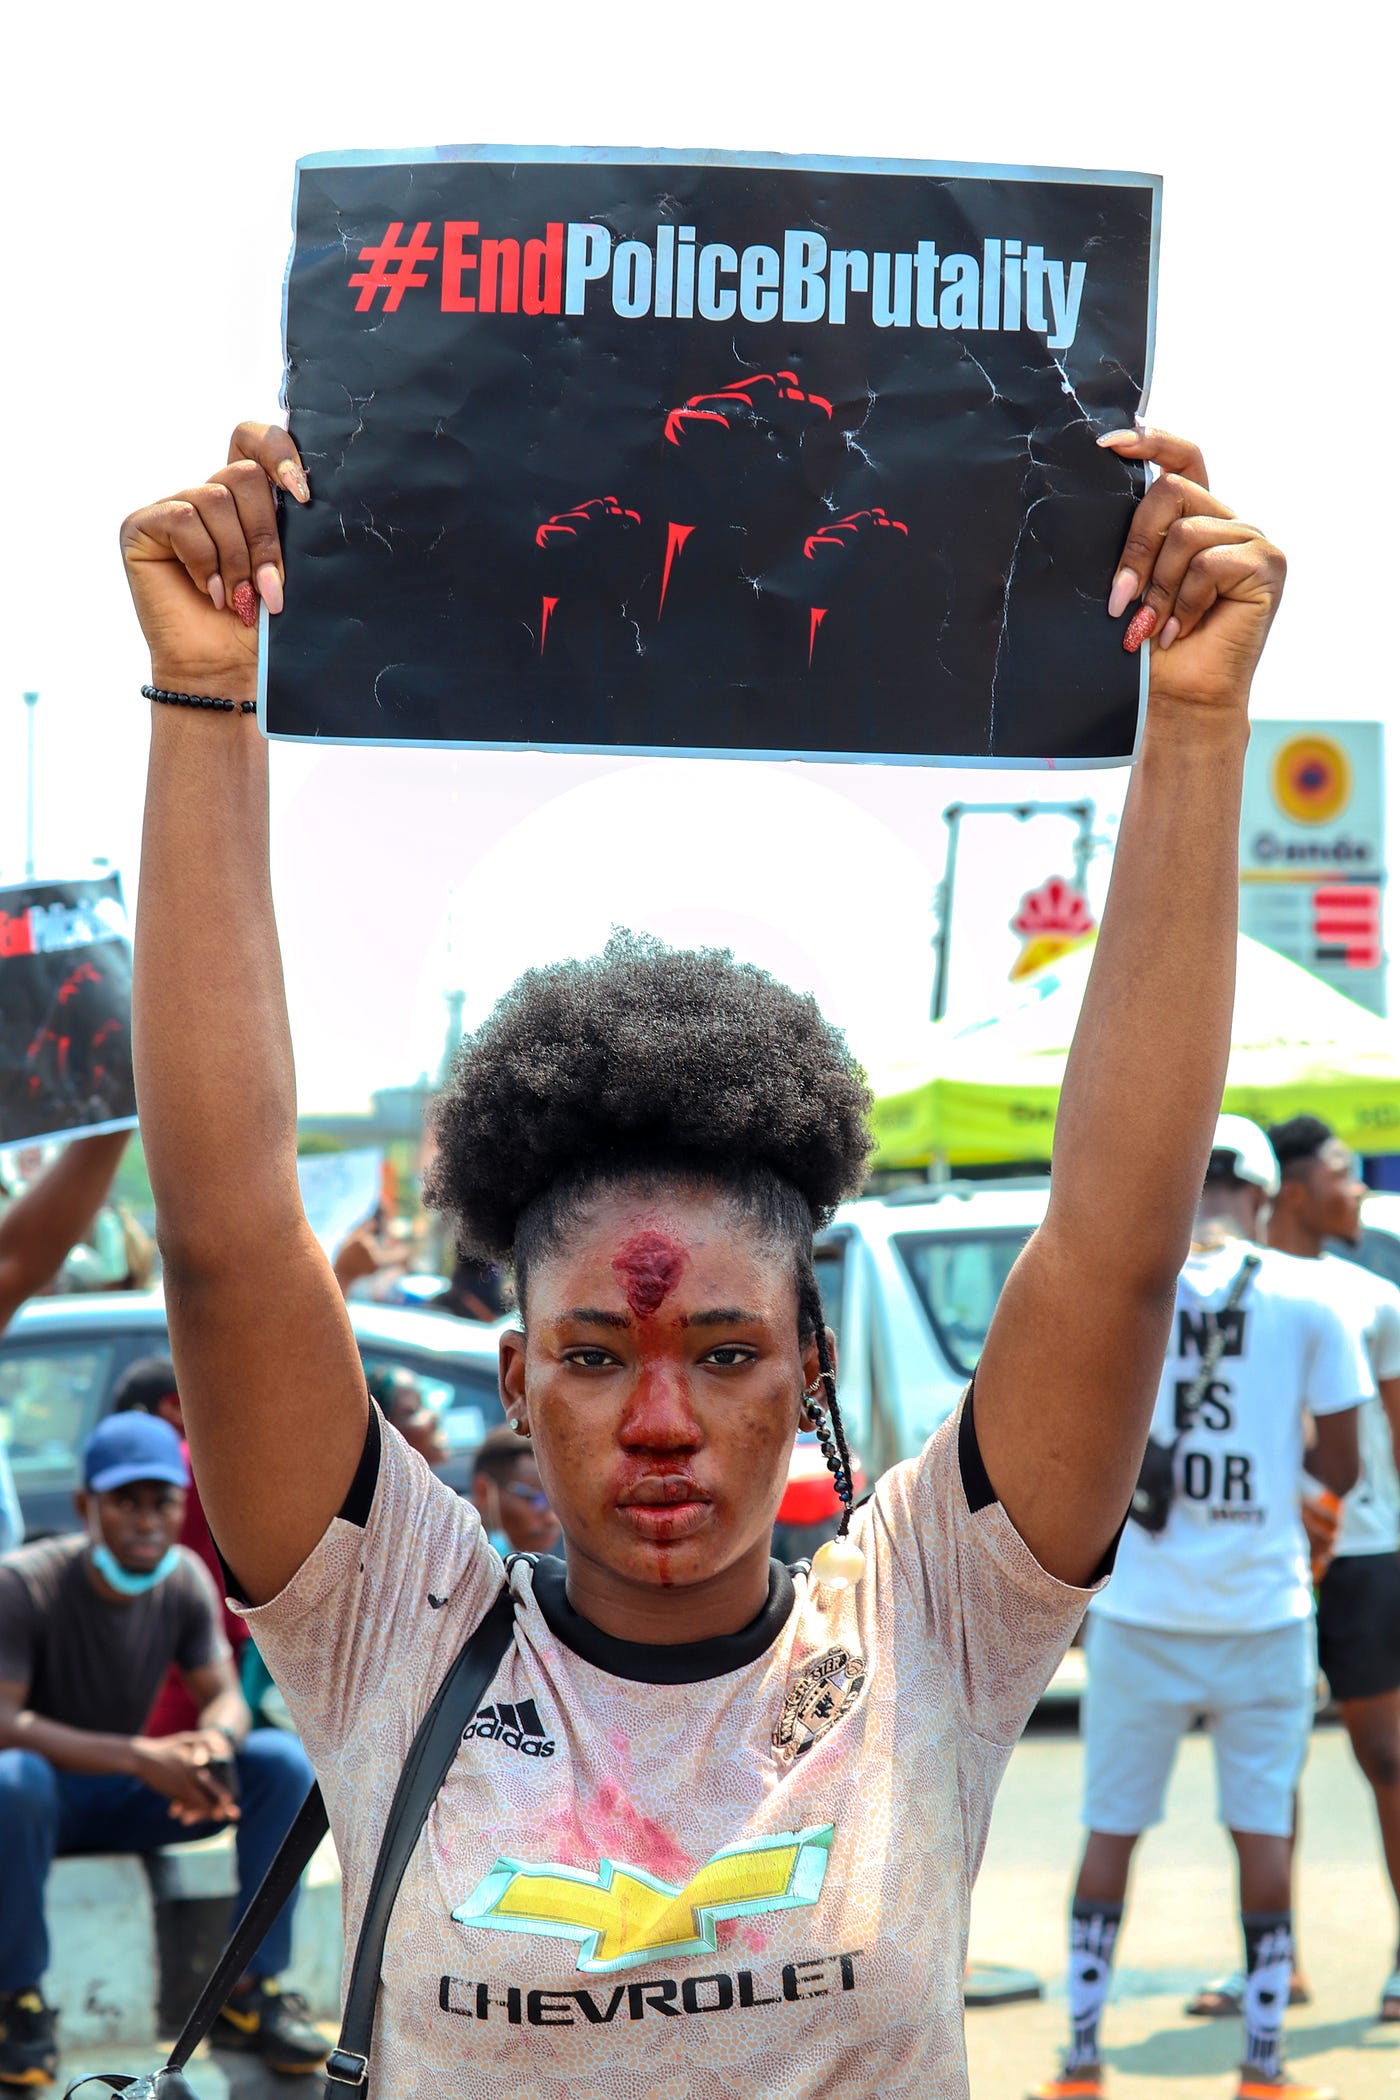 Attractive young woman holds aloft a sign saying, “EndPoliceBrutality” during a protest. She is costumed like a victim.